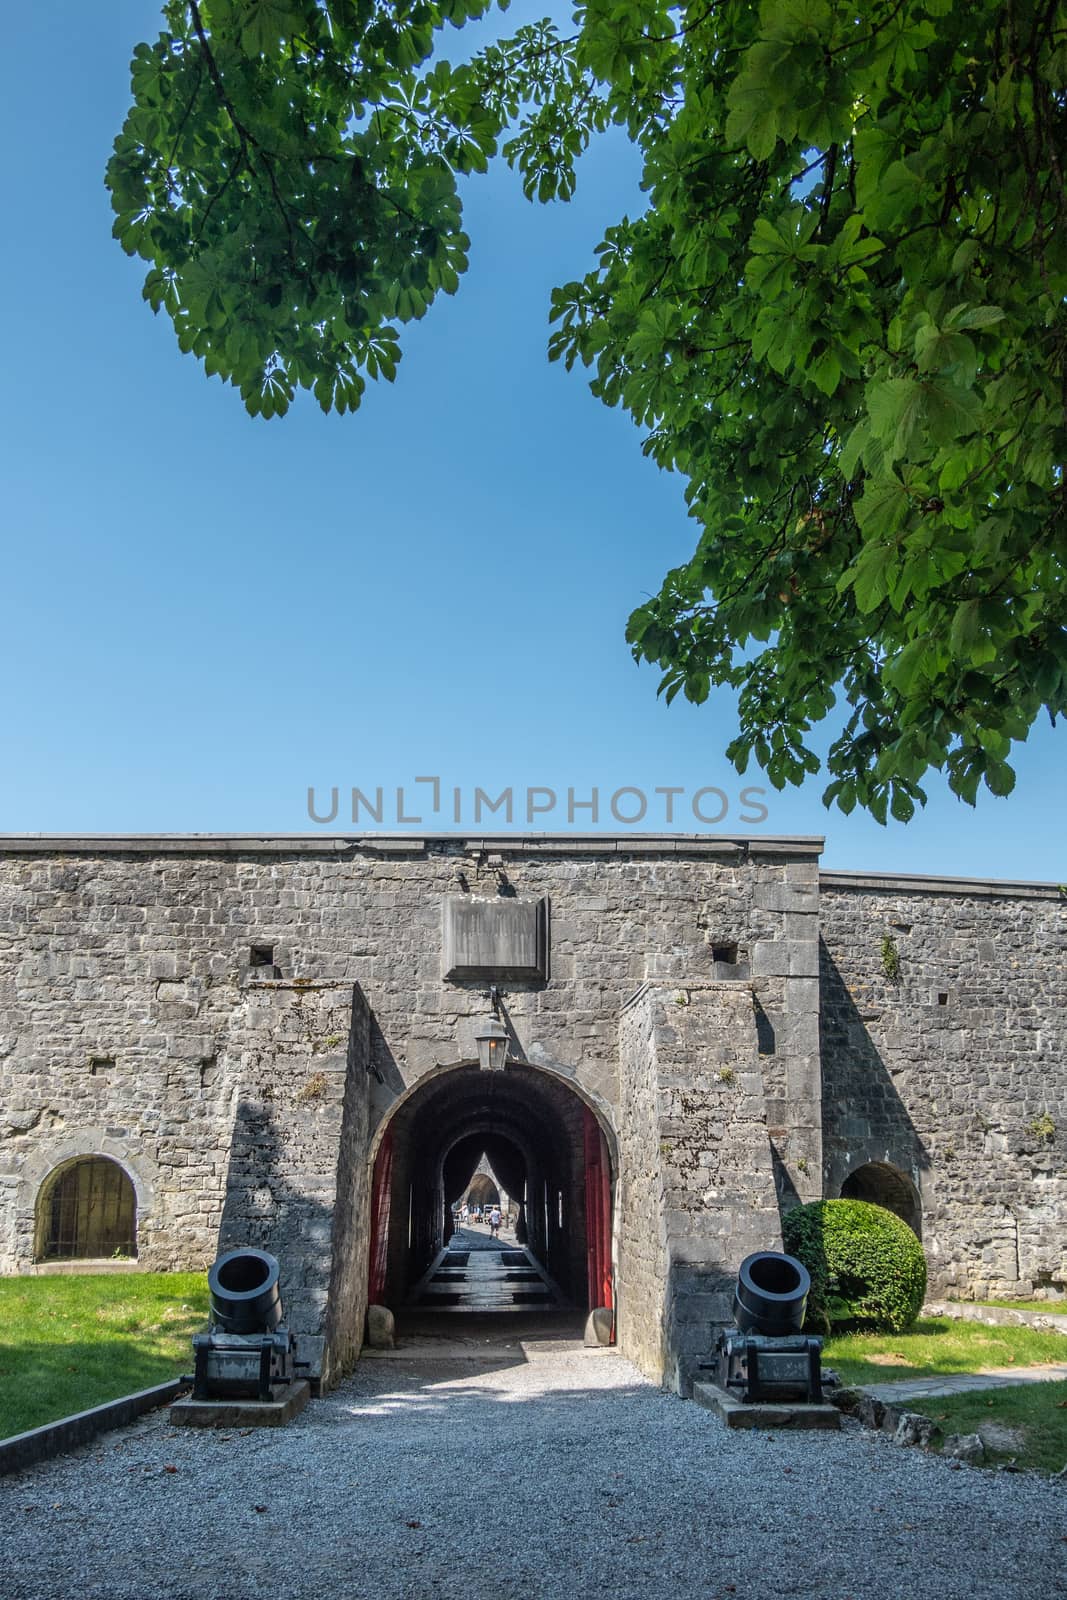 Dinant, Belgium - June 26, 2019: Inside Citadelle. Gray stoen Ramparts and gate to inner courtyard with rooms against blue sky, Green foliage.